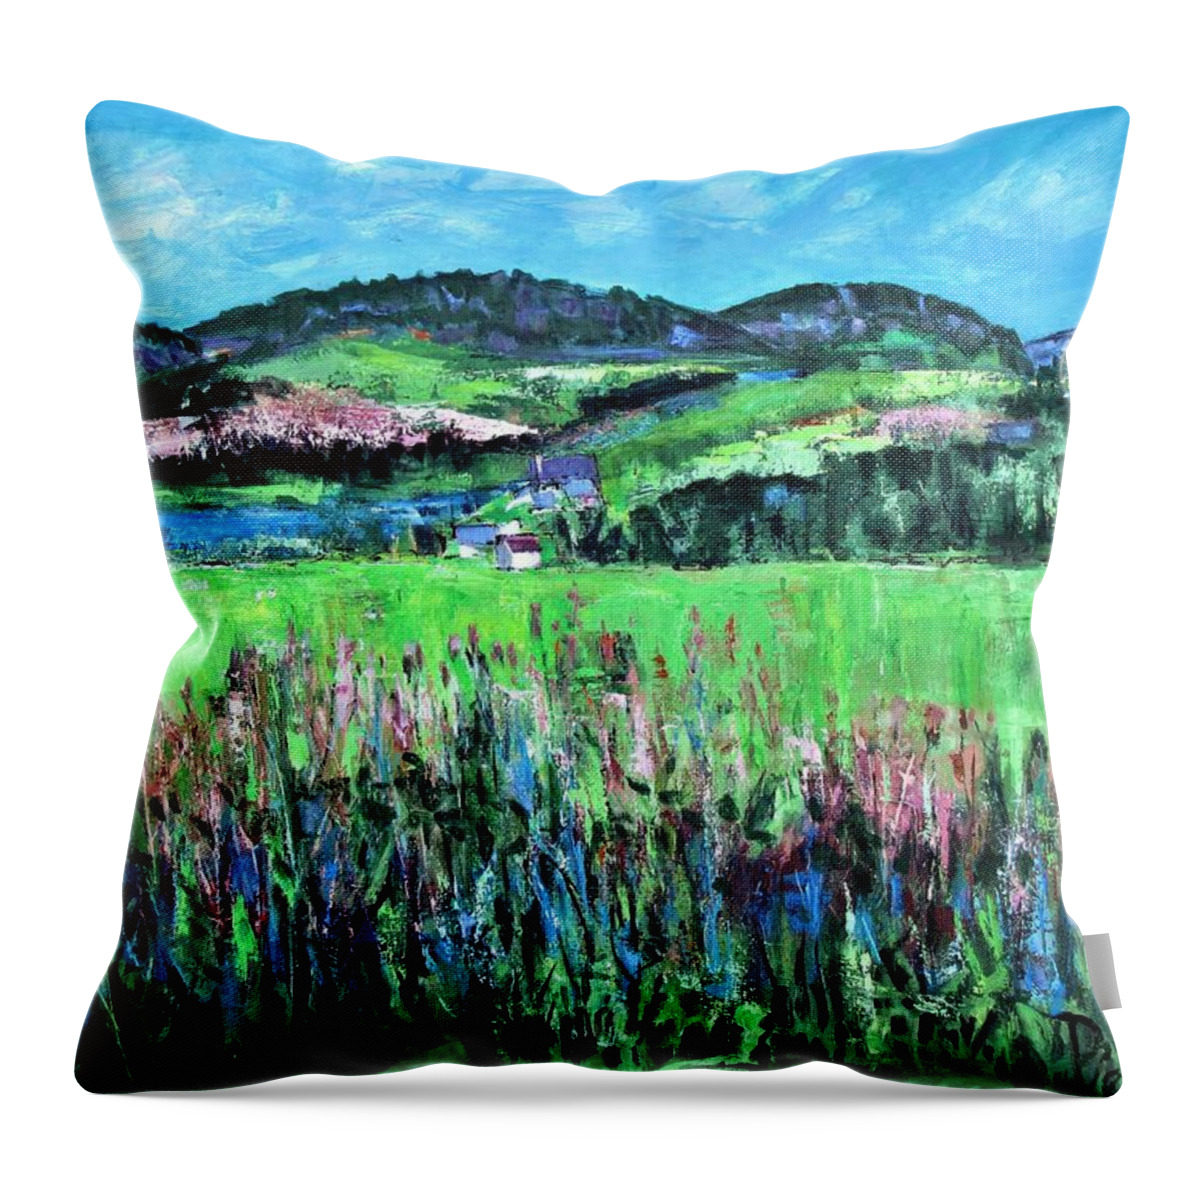 Weeds And Fields Throw Pillow featuring the painting Near Cooperstown by Betty Pieper